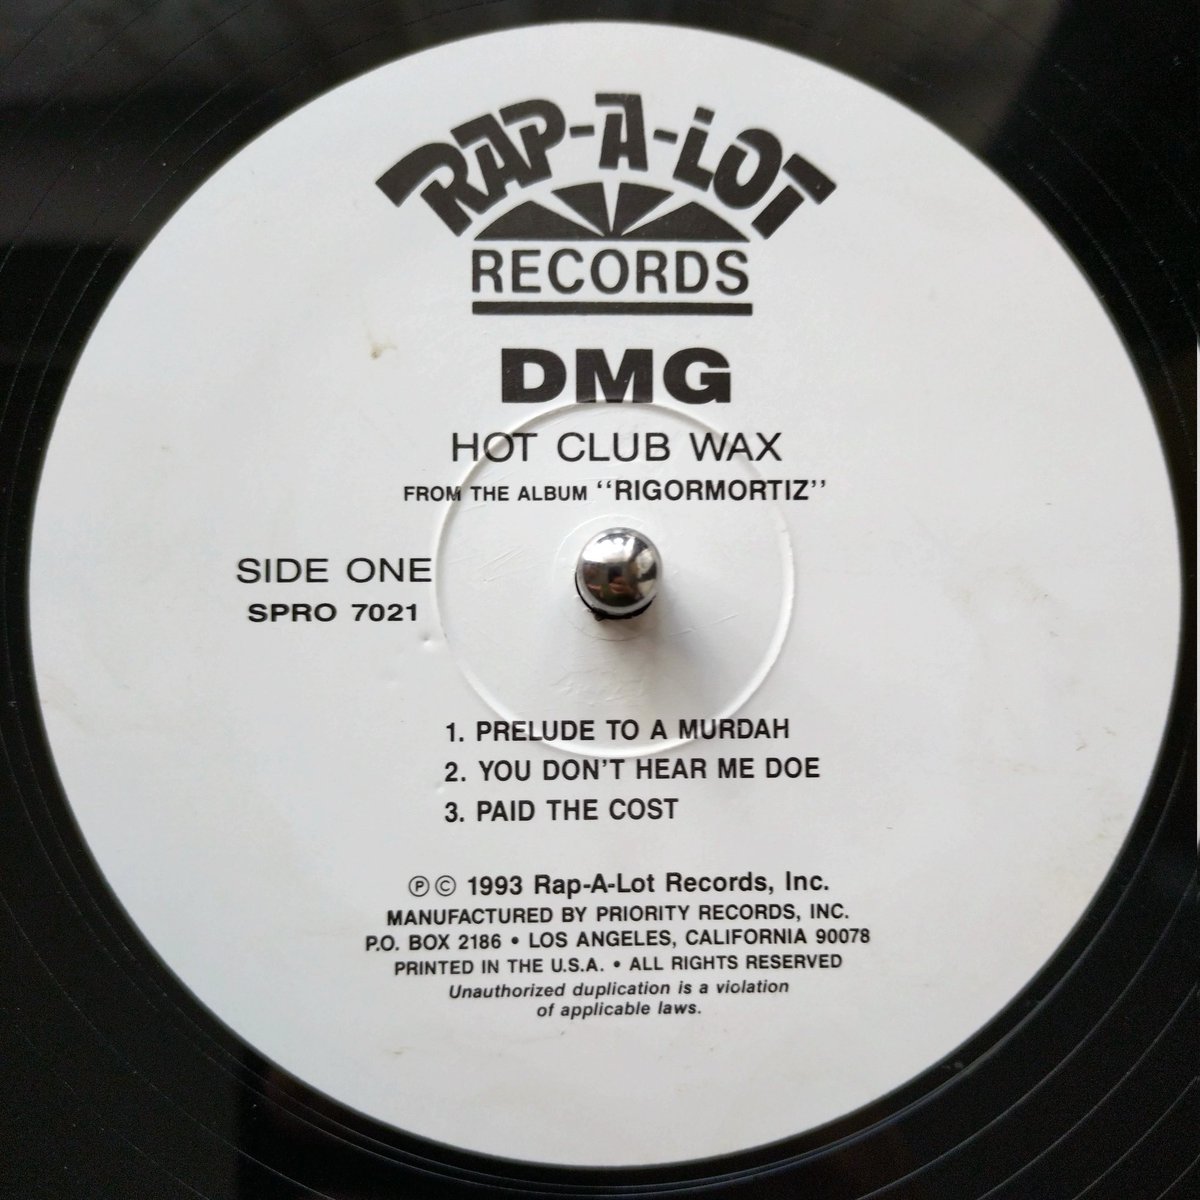 Listening through my record collection, day 46.

DMG.

#vinylcollection #90sHipHop #gangstarap #rapalotrecords #midwestrap